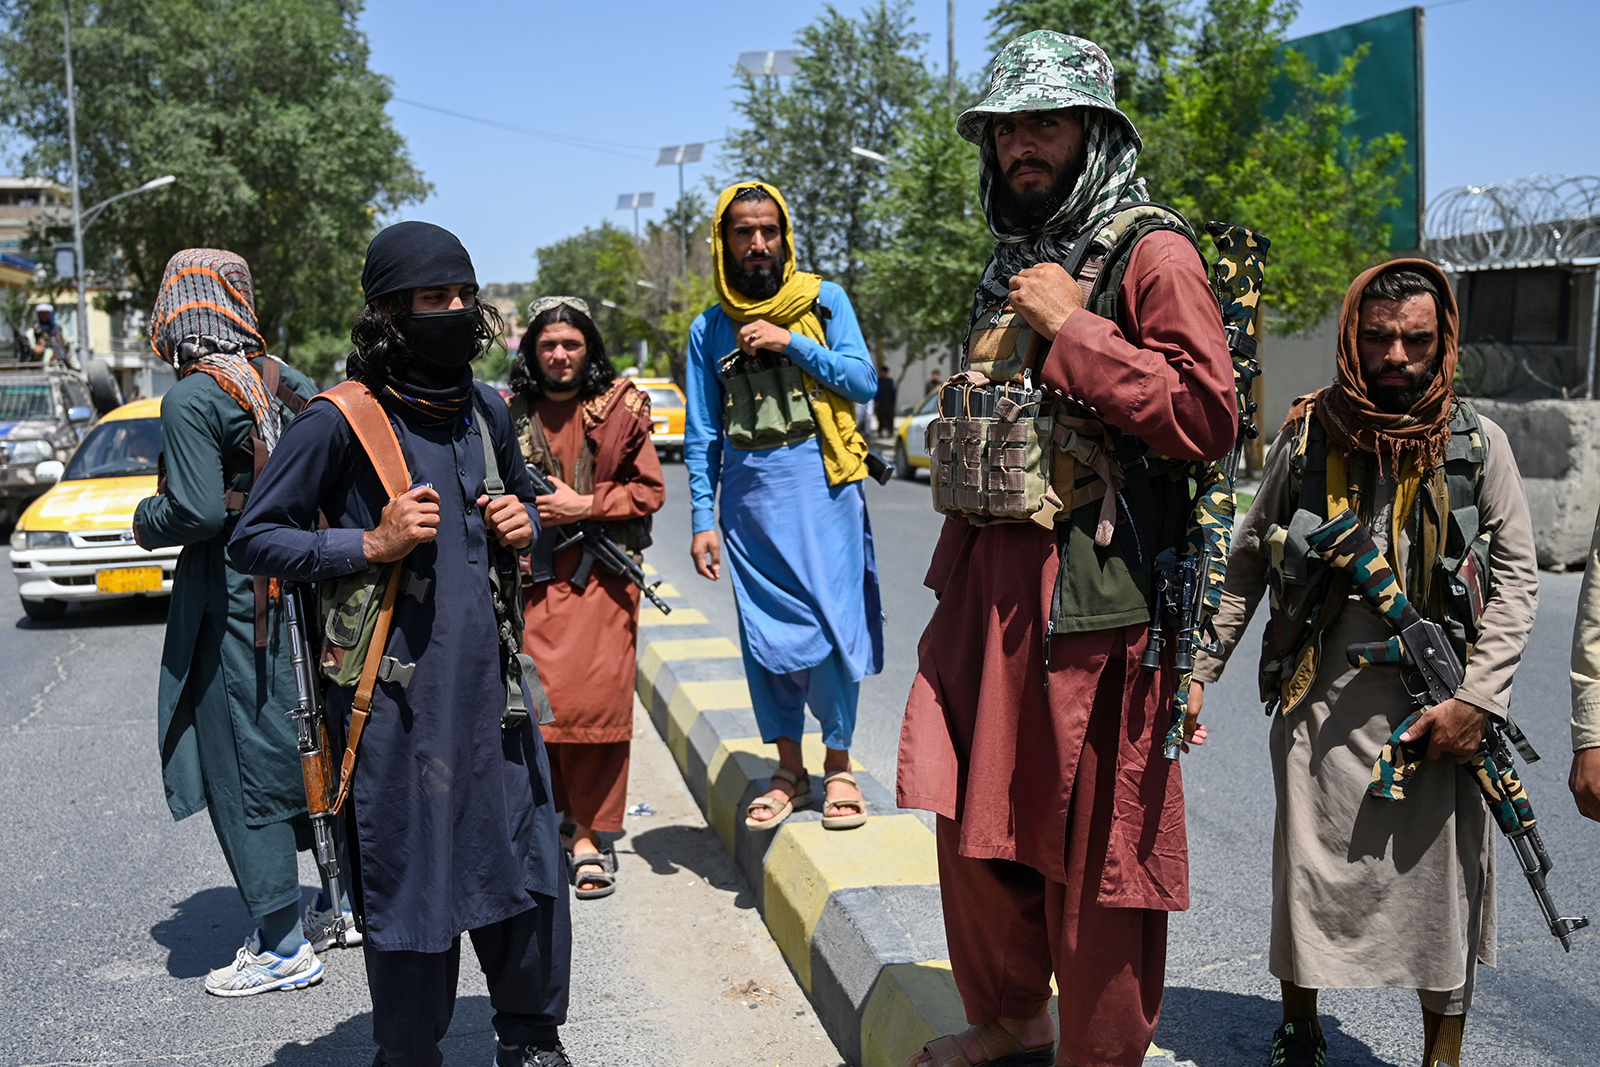 Taliban fighters stand guard along a street near the Zanbaq Square in Kabul on August 16.